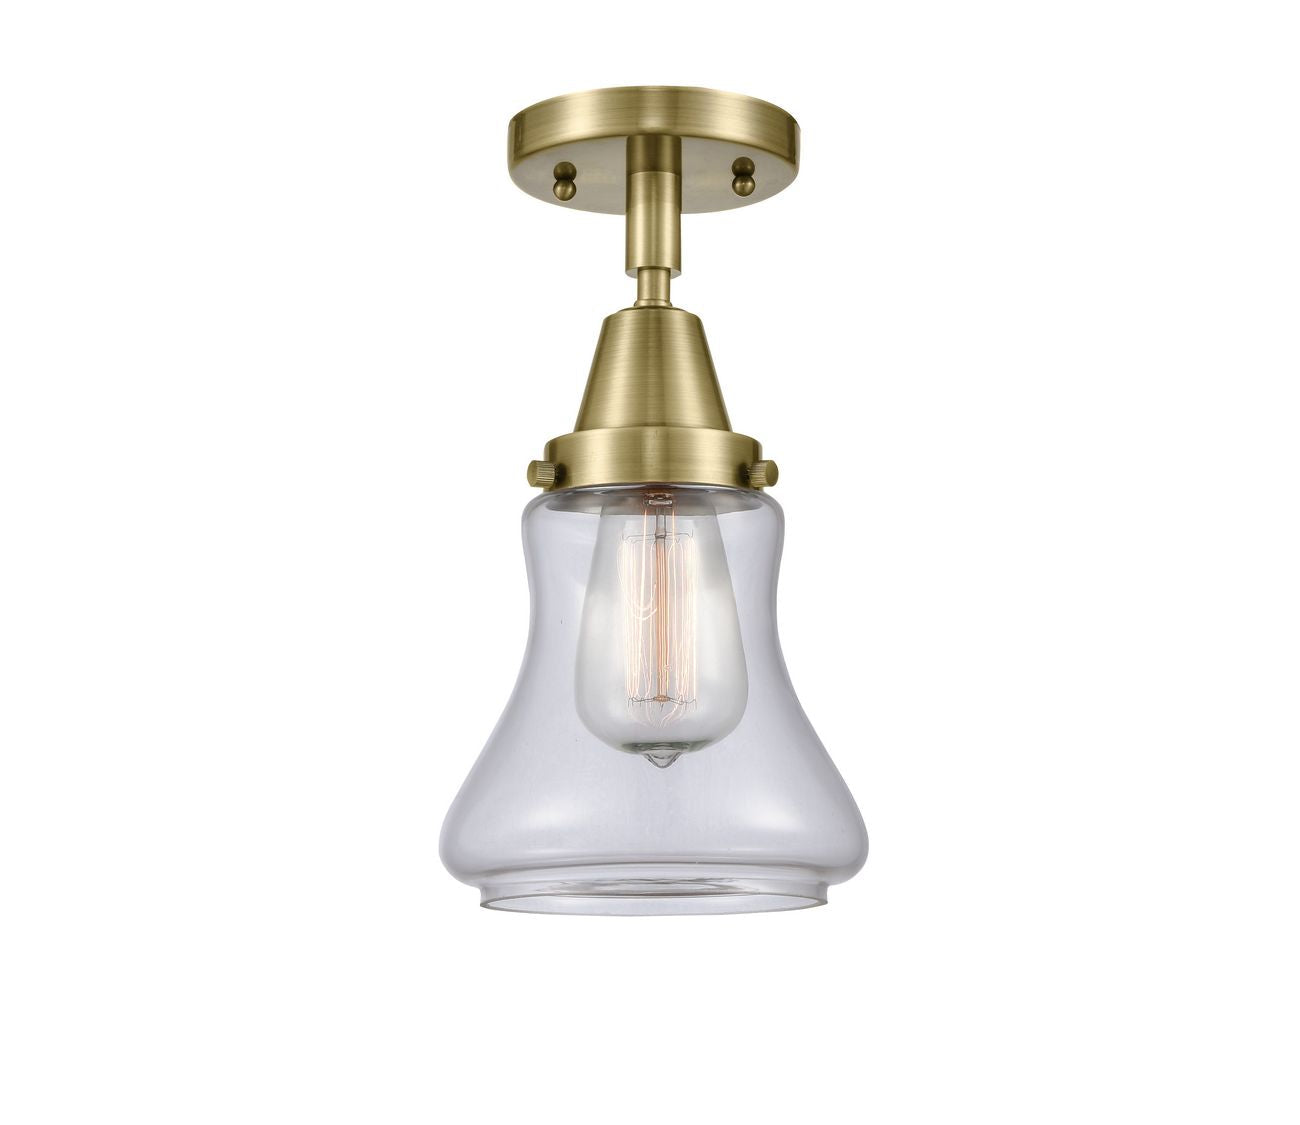 1-Light 6.25" Bellmont Flush Mount - Bell-Urn Clear Glass - Choice of Finish And Incandesent Or LED Bulbs